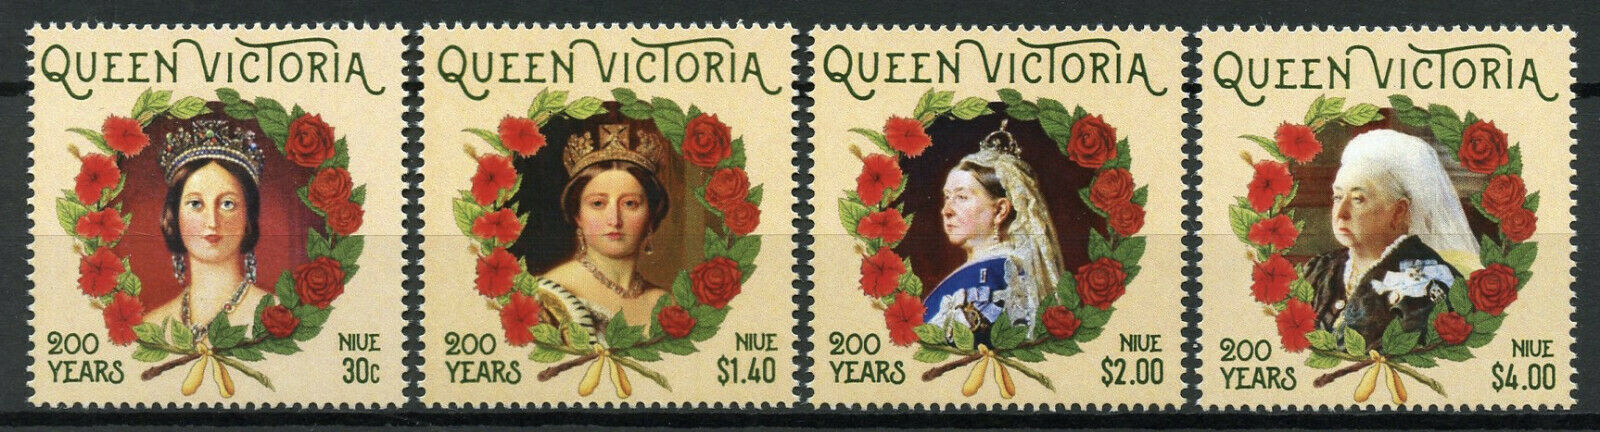 Niue Royalty Stamps 2019 MNH Queen Victoria 200th Birth Anniv 4v Set